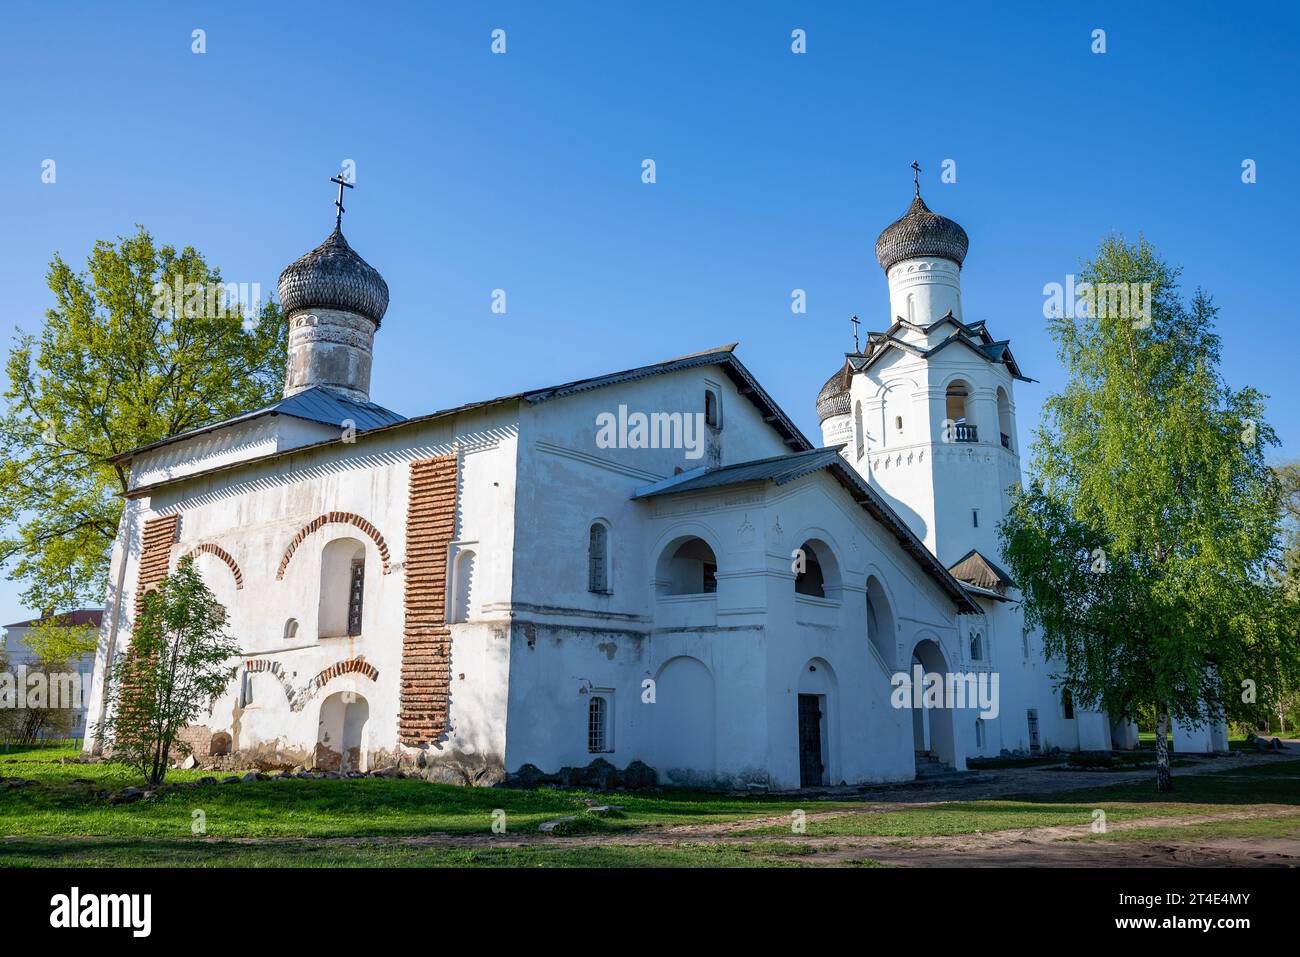 The ancient Cathedral of the Transfiguration Monastery. Staraya Russa, Russia Stock Photo